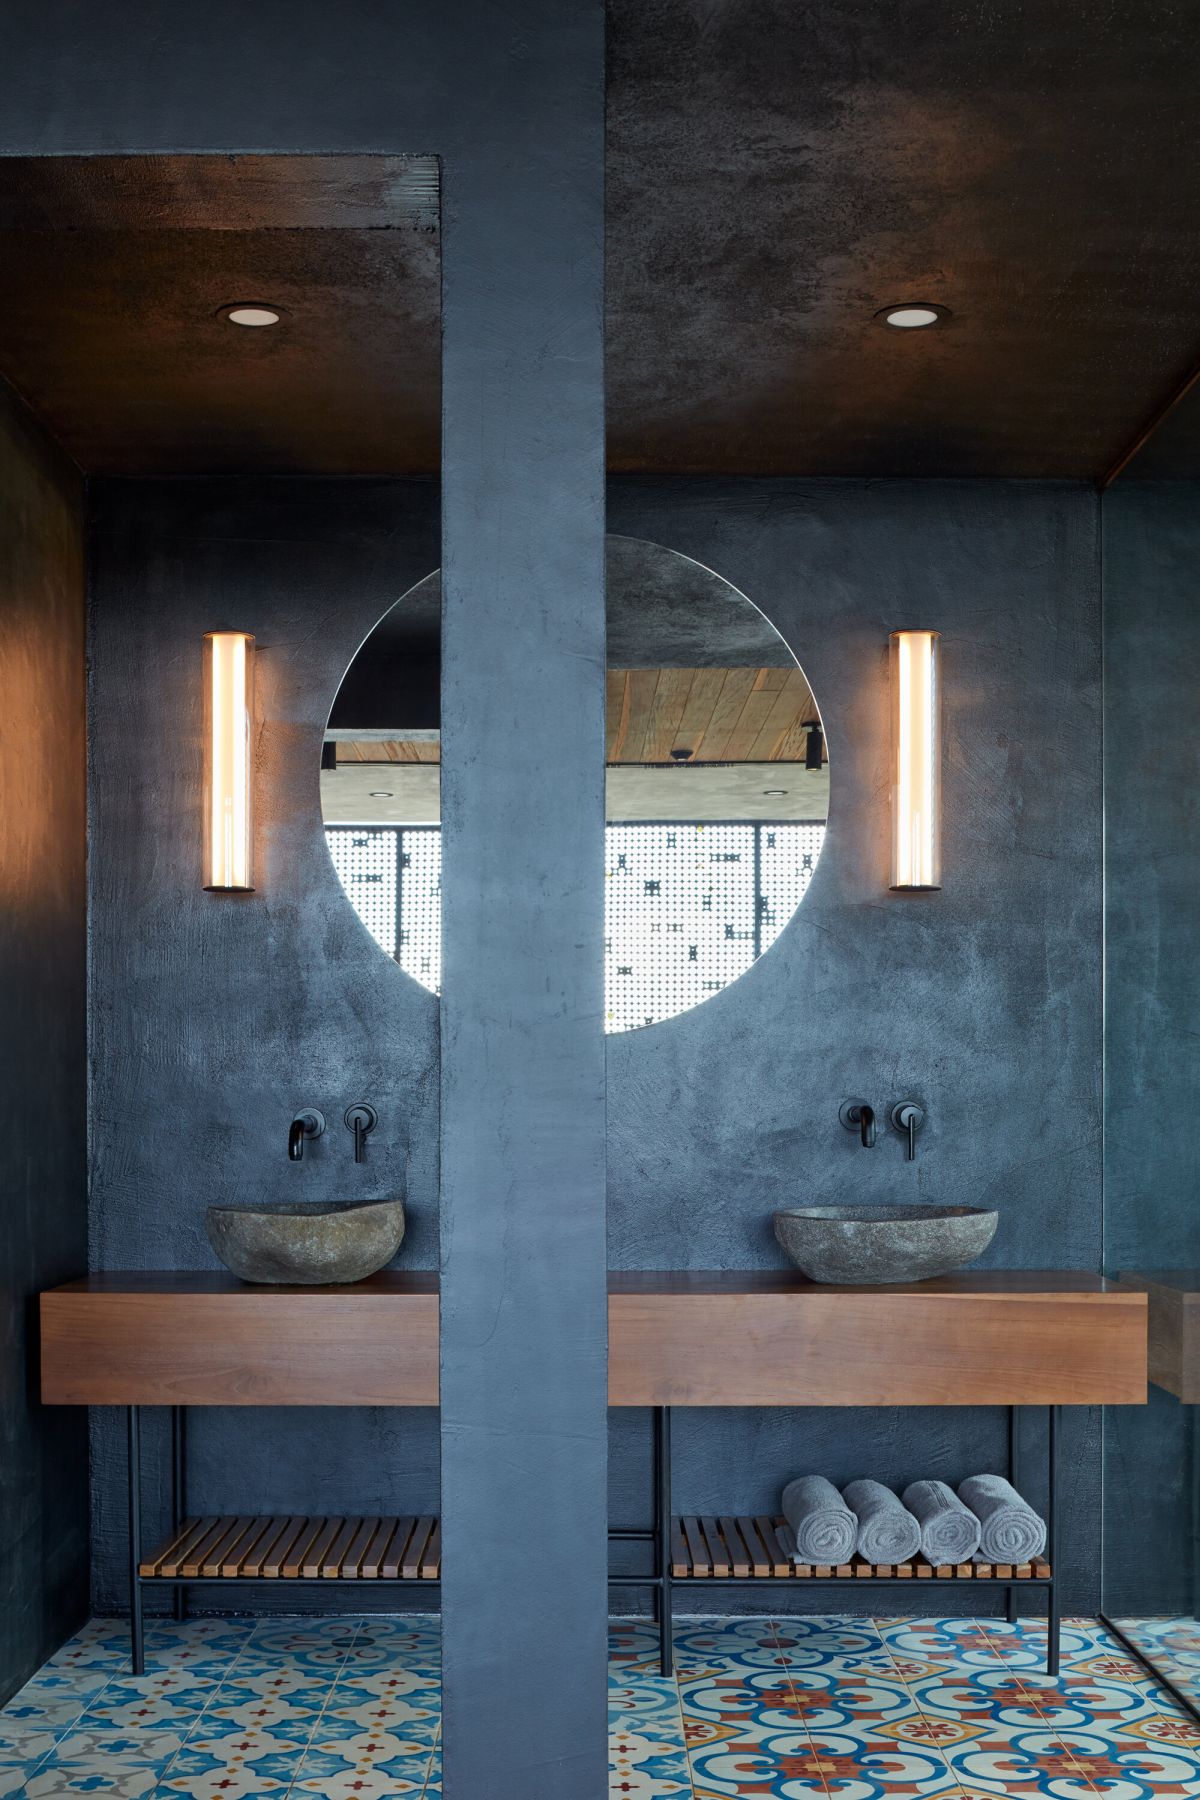 The master bathroom shows off concrete walls, cool  colorful tile floors, and rough stone sinks